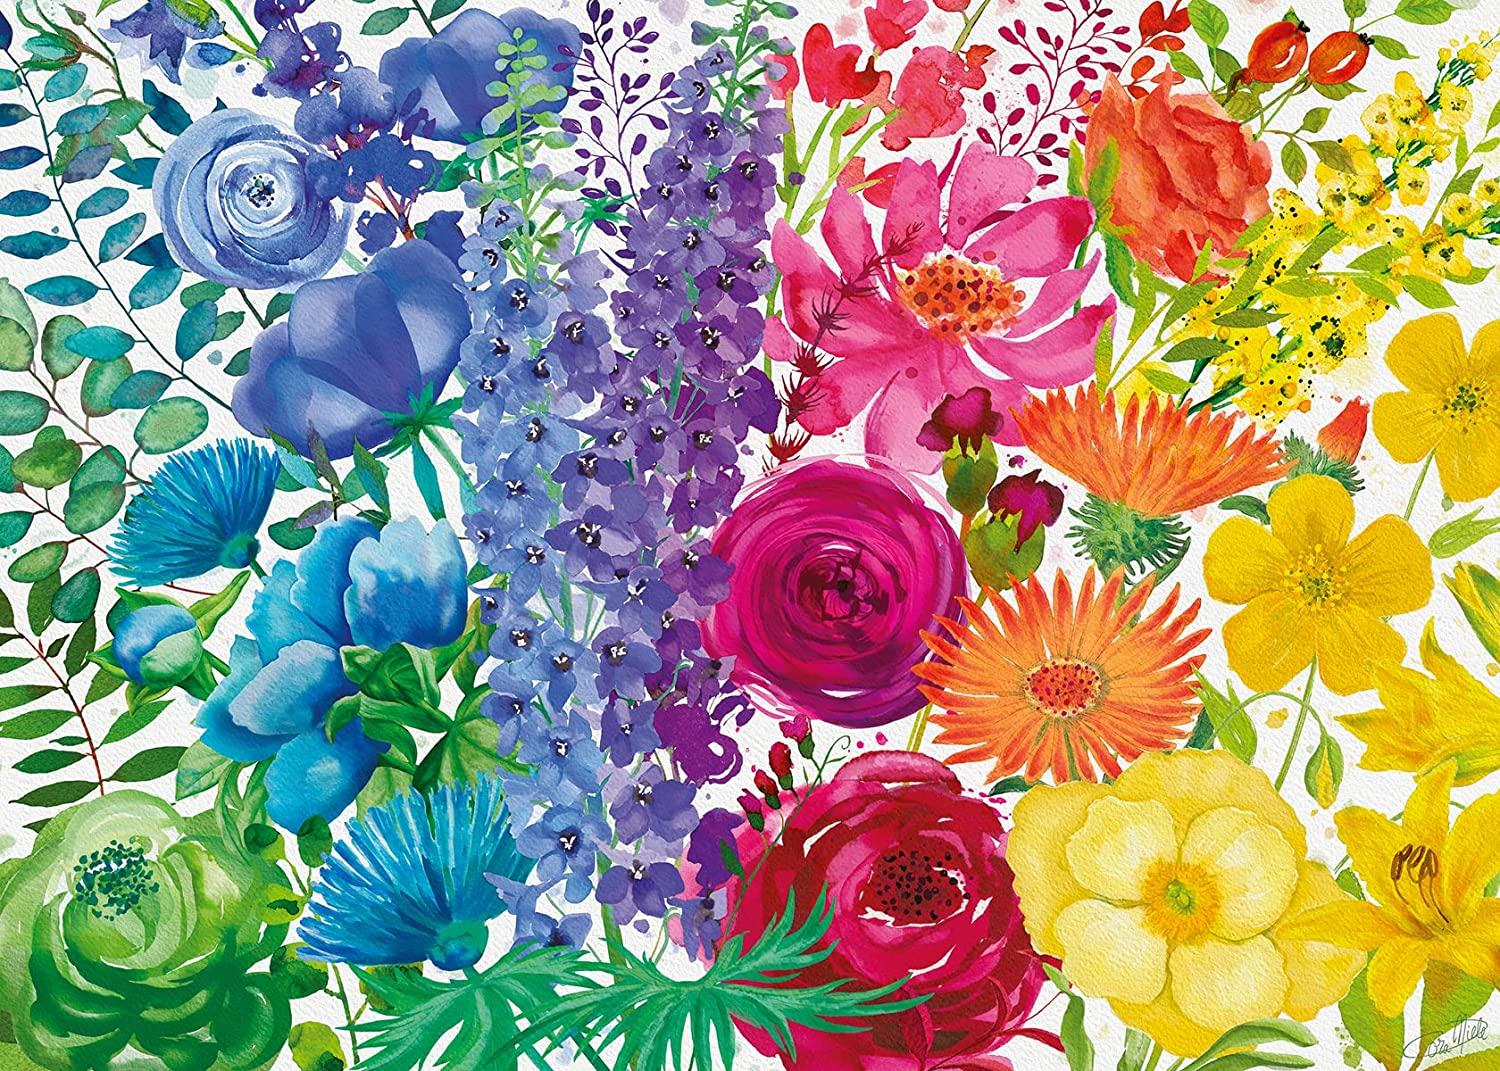 Spend a little time in the garden while staying comfy and cozy indoors puzzling this beautiful botanical illustration! Our "Floral Rainbow" includes stately blue delphinium, delicate pink cosmos, violet multilayered ranunculus and cheerful yellow cinquefoil.